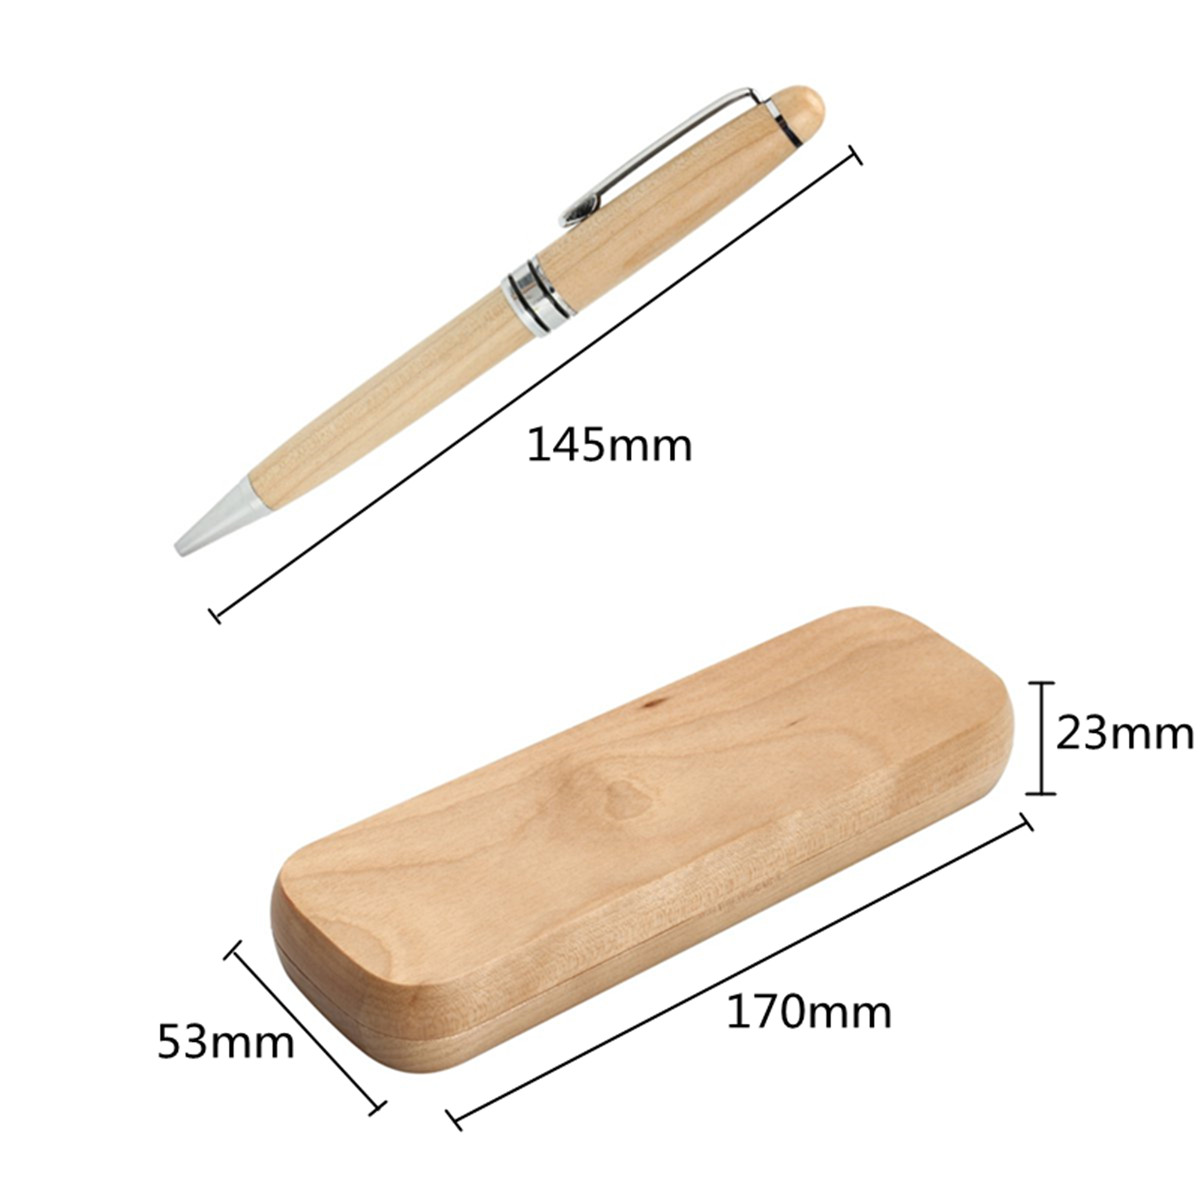 07mm-Wooden-Engraved-Ballpoint-Pen-WIth-Gift-Box-For-Kids-Students-Children-School-Writing-Gift-1312248